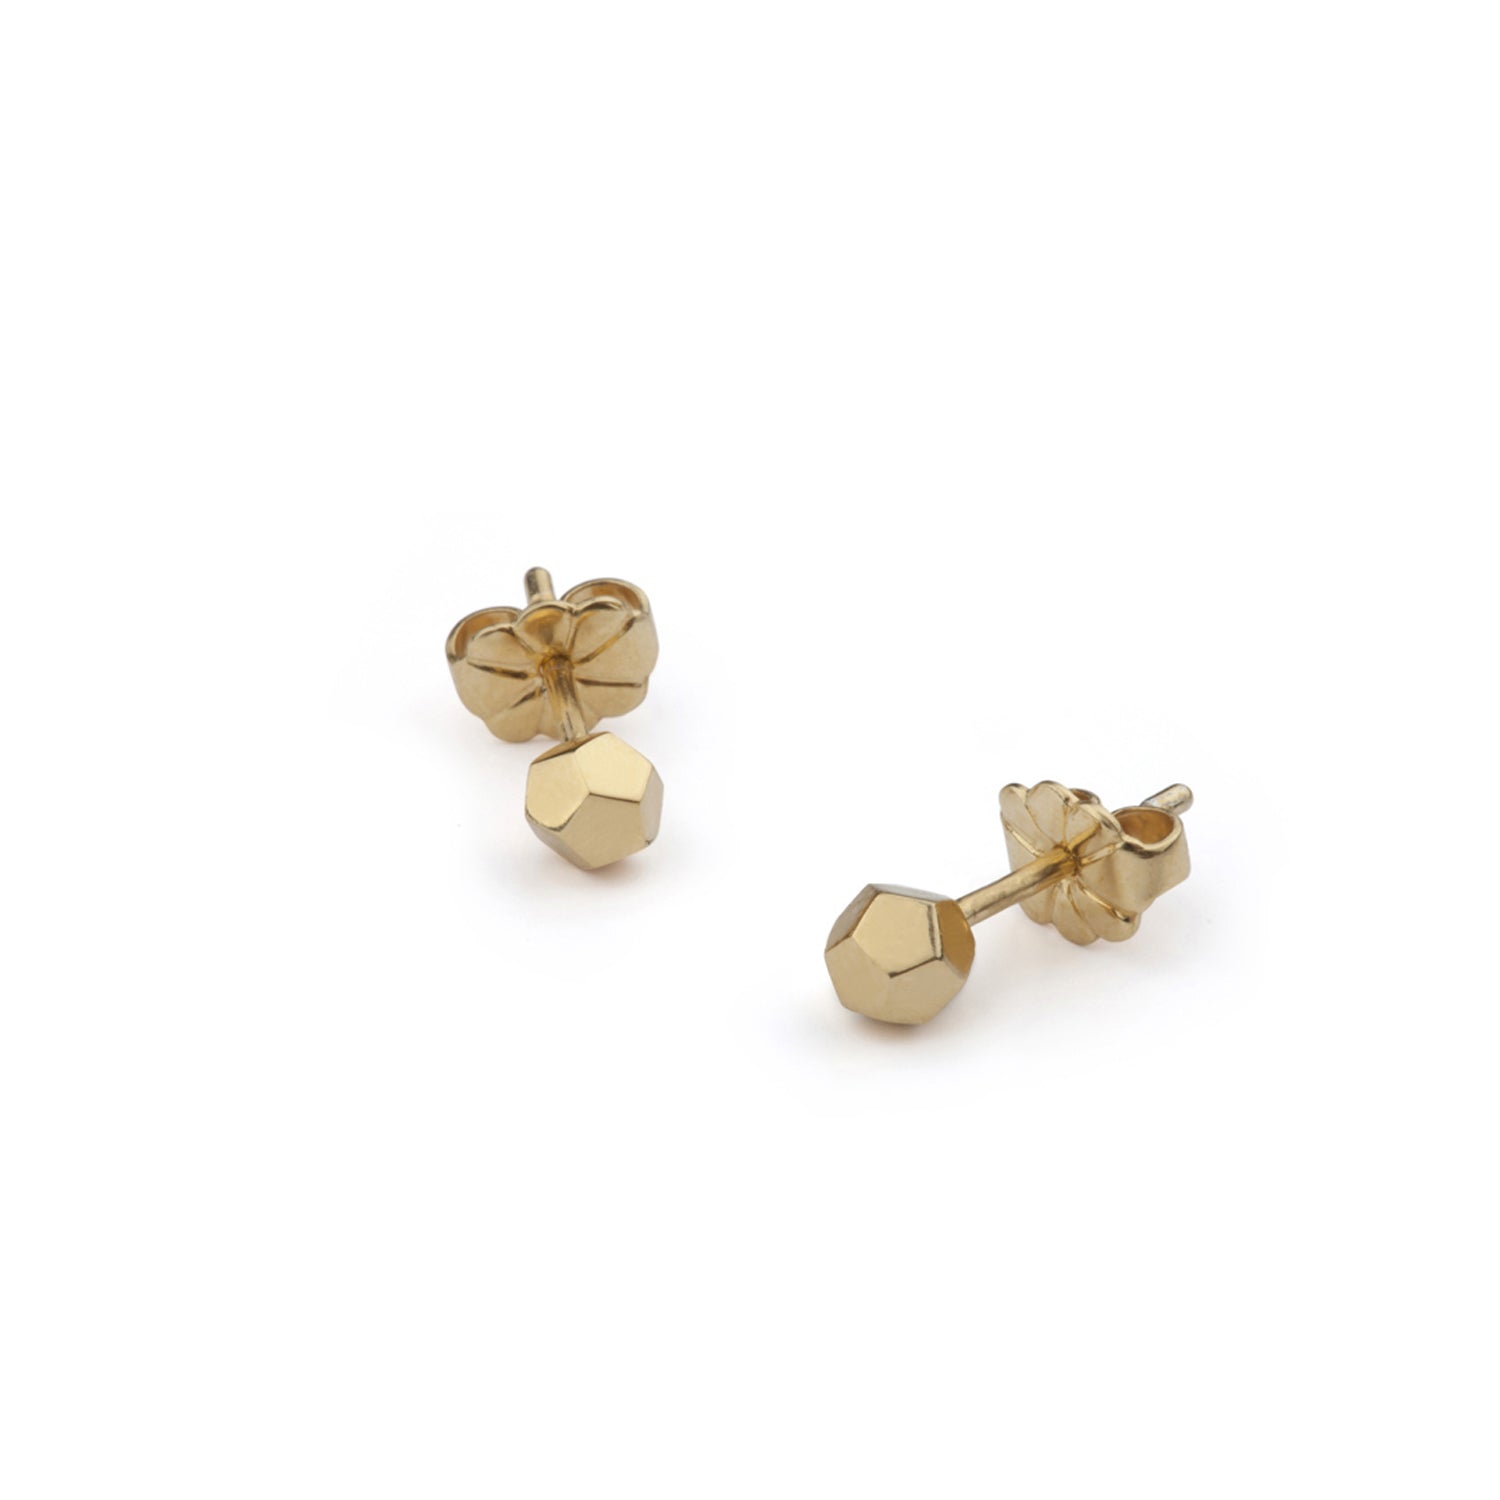 Dodecahedron Stud Earrings - Gold - Myia Bonner Jewellery